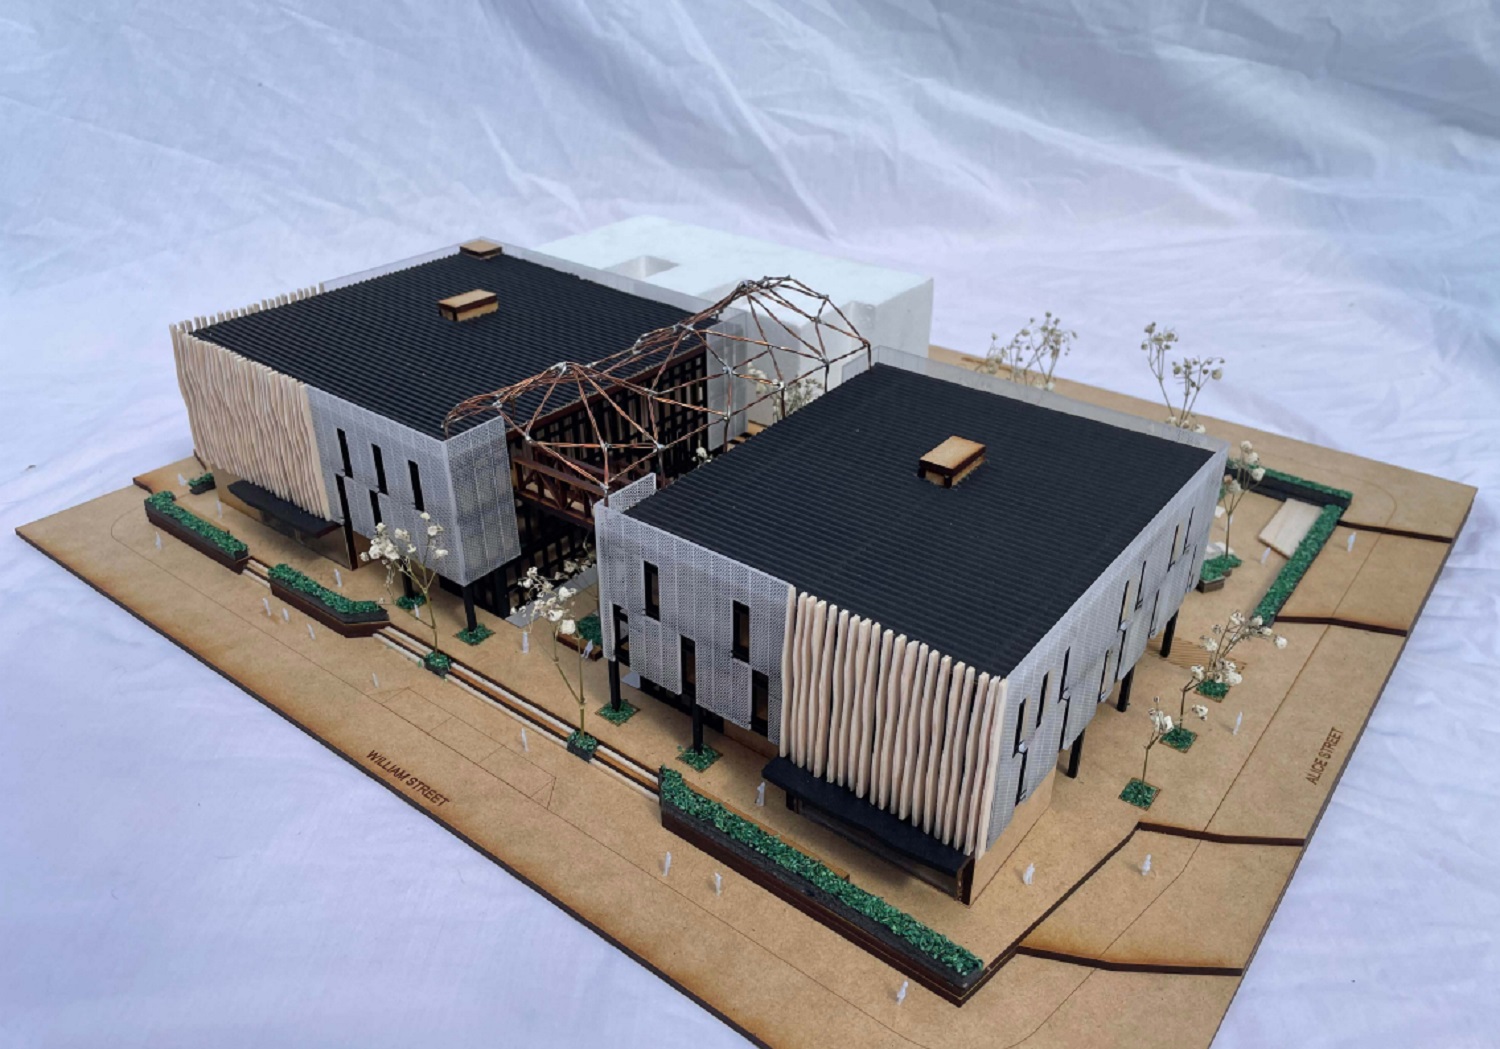 Physical Model of Building - William Street entrance